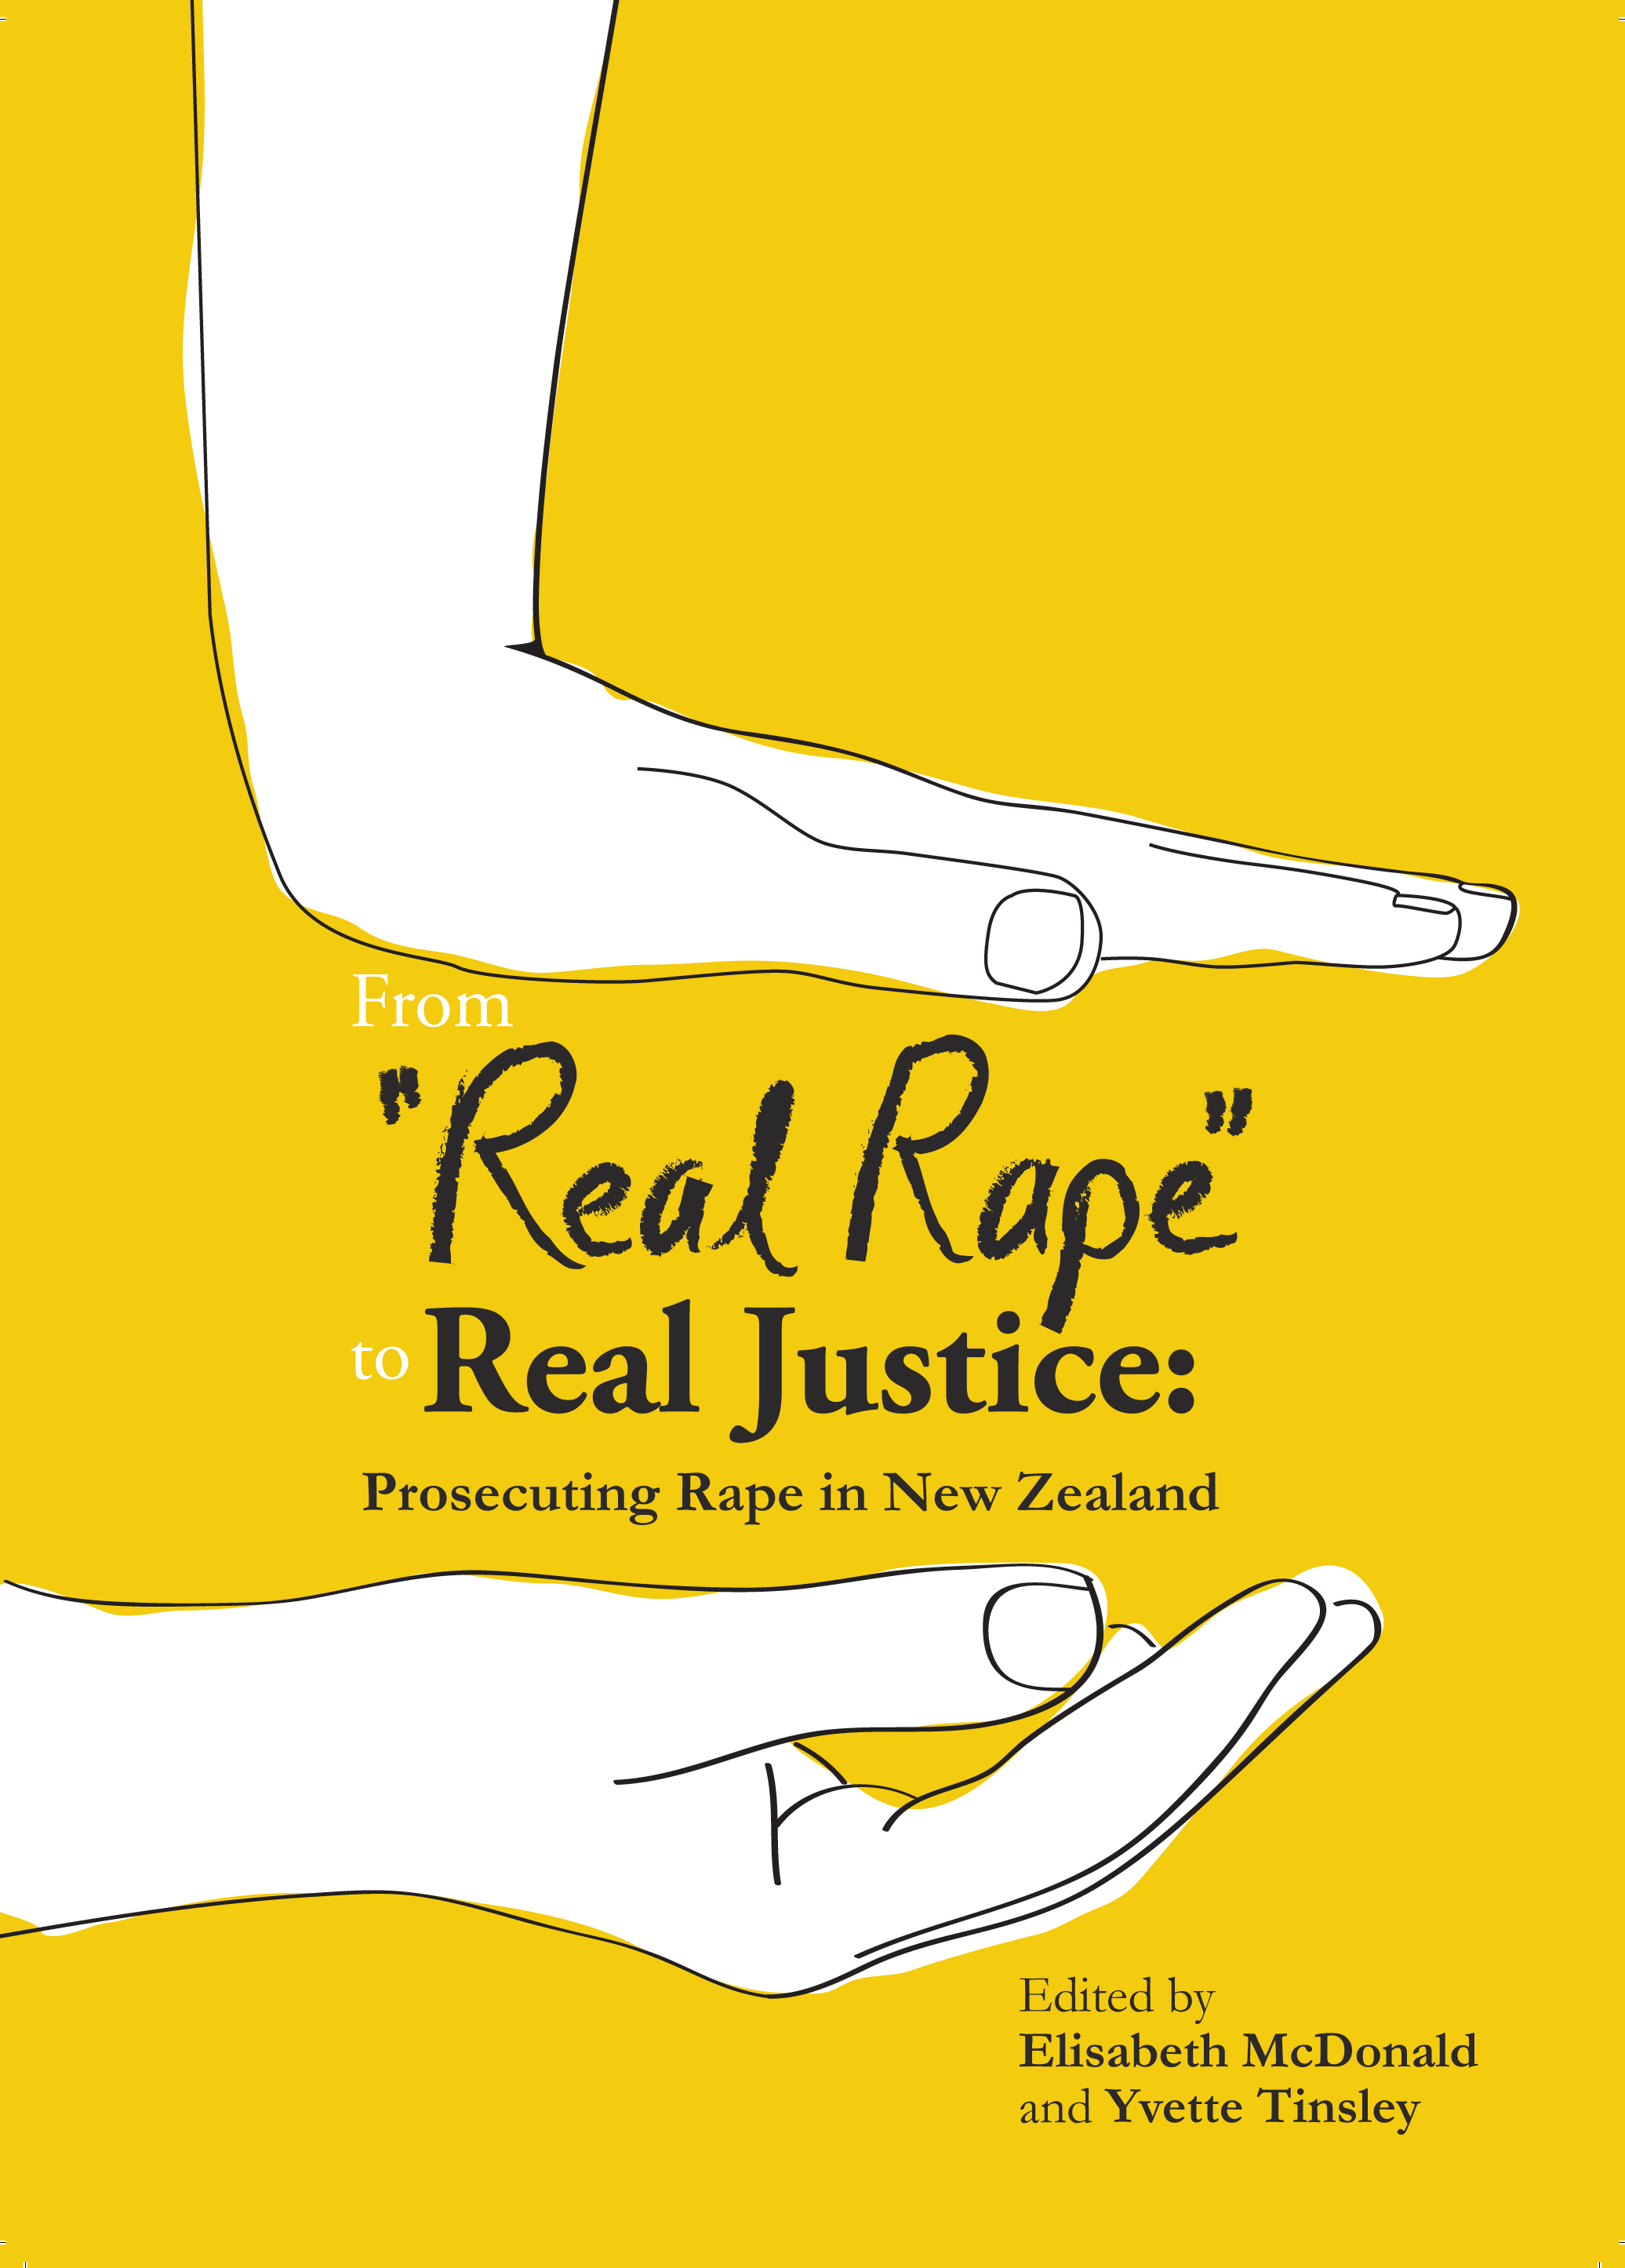 From Real Rape